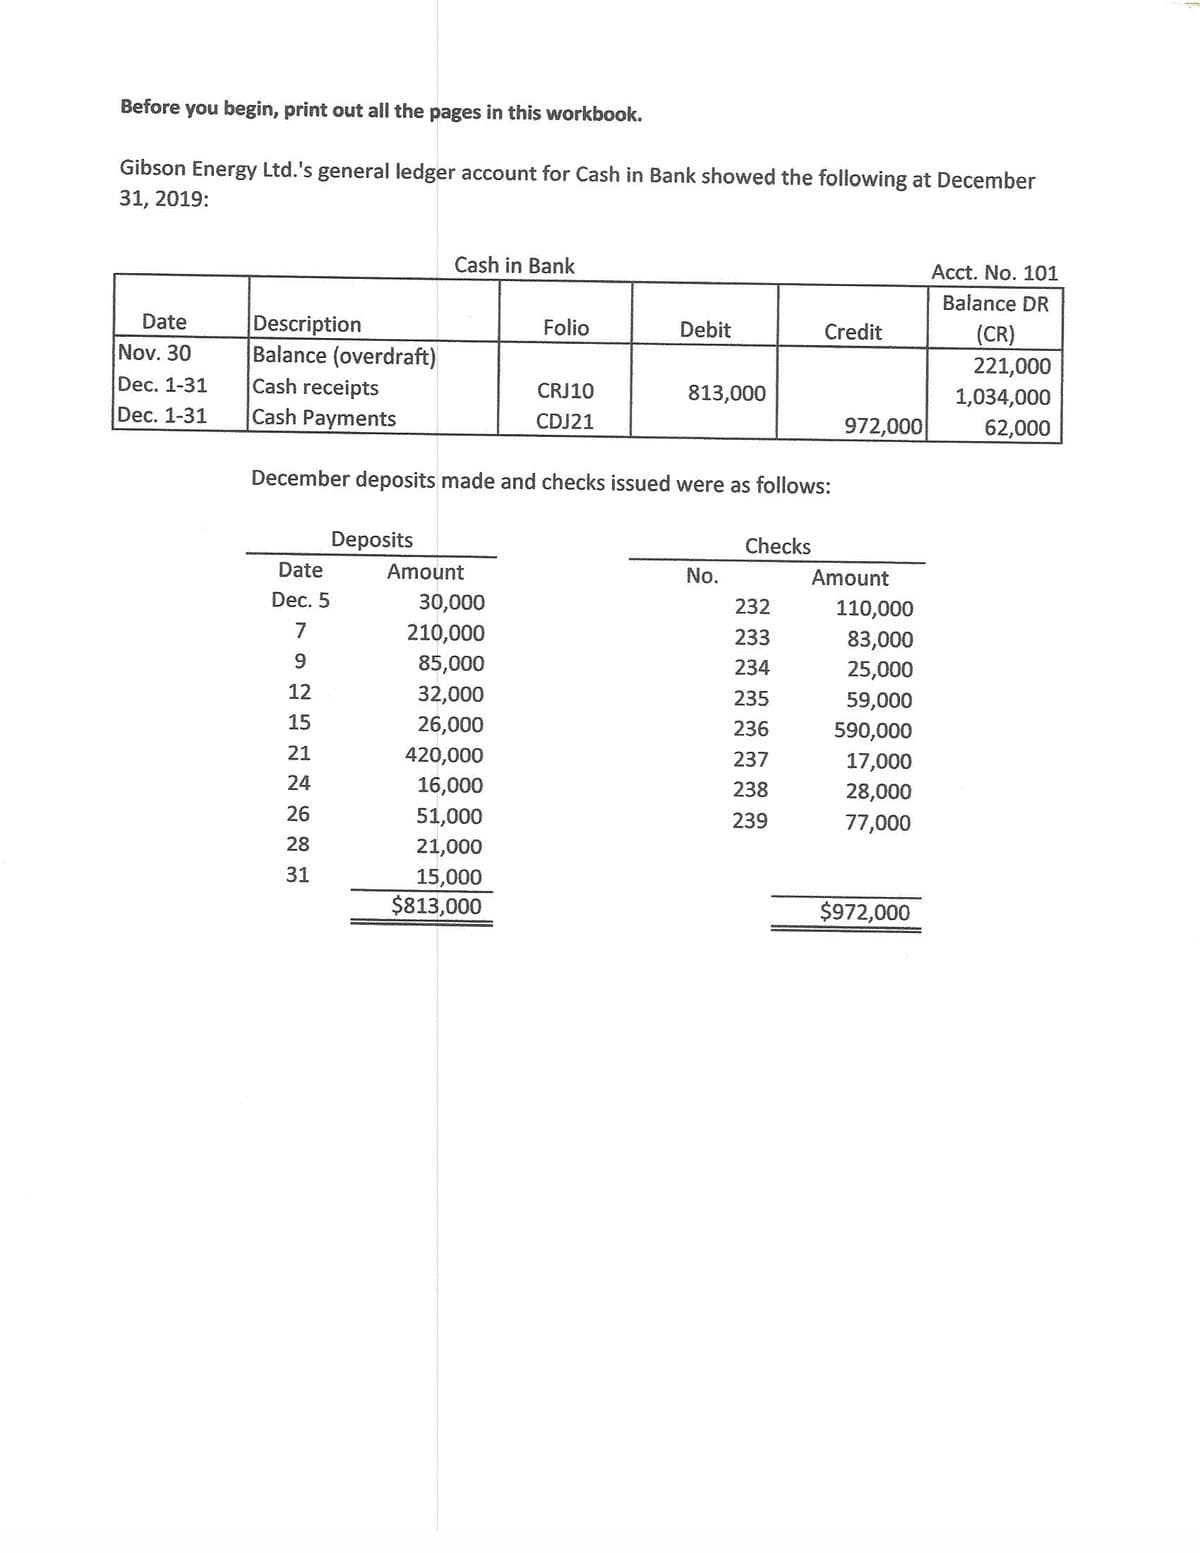 Before
you begin, print out all the pages in this workbook.
Gibson Energy Ltd.'s general ledger account for Cash in Bank showed the following at December
31, 2019:
Cash in Bank
Аcct. No. 101
Balance DR
Description
Balance (overdraft)
Cash receipts
Cash Payments
Date
Folio
Debit
Credit
(CR)
Nov. 30
221,000
Dec. 1-31
CRJ10
813,000
1,034,000
Dec. 1-31
CDJ21
972,000
62,000
December deposits made and checks issued were as follows:
Deposits
Checks
Date
Amount
No.
Amount
Dec. 5
30,000
210,000
232
110,000
7
233
83,000
85,000
234
25,000
12
32,000
235
59,000
15
26,000
236
590,000
21
420,000
237
17,000
24
16,000
238
28,000
26
51,000
239
77,000
28
21,000
31
15,000
$813,000
$972,000
